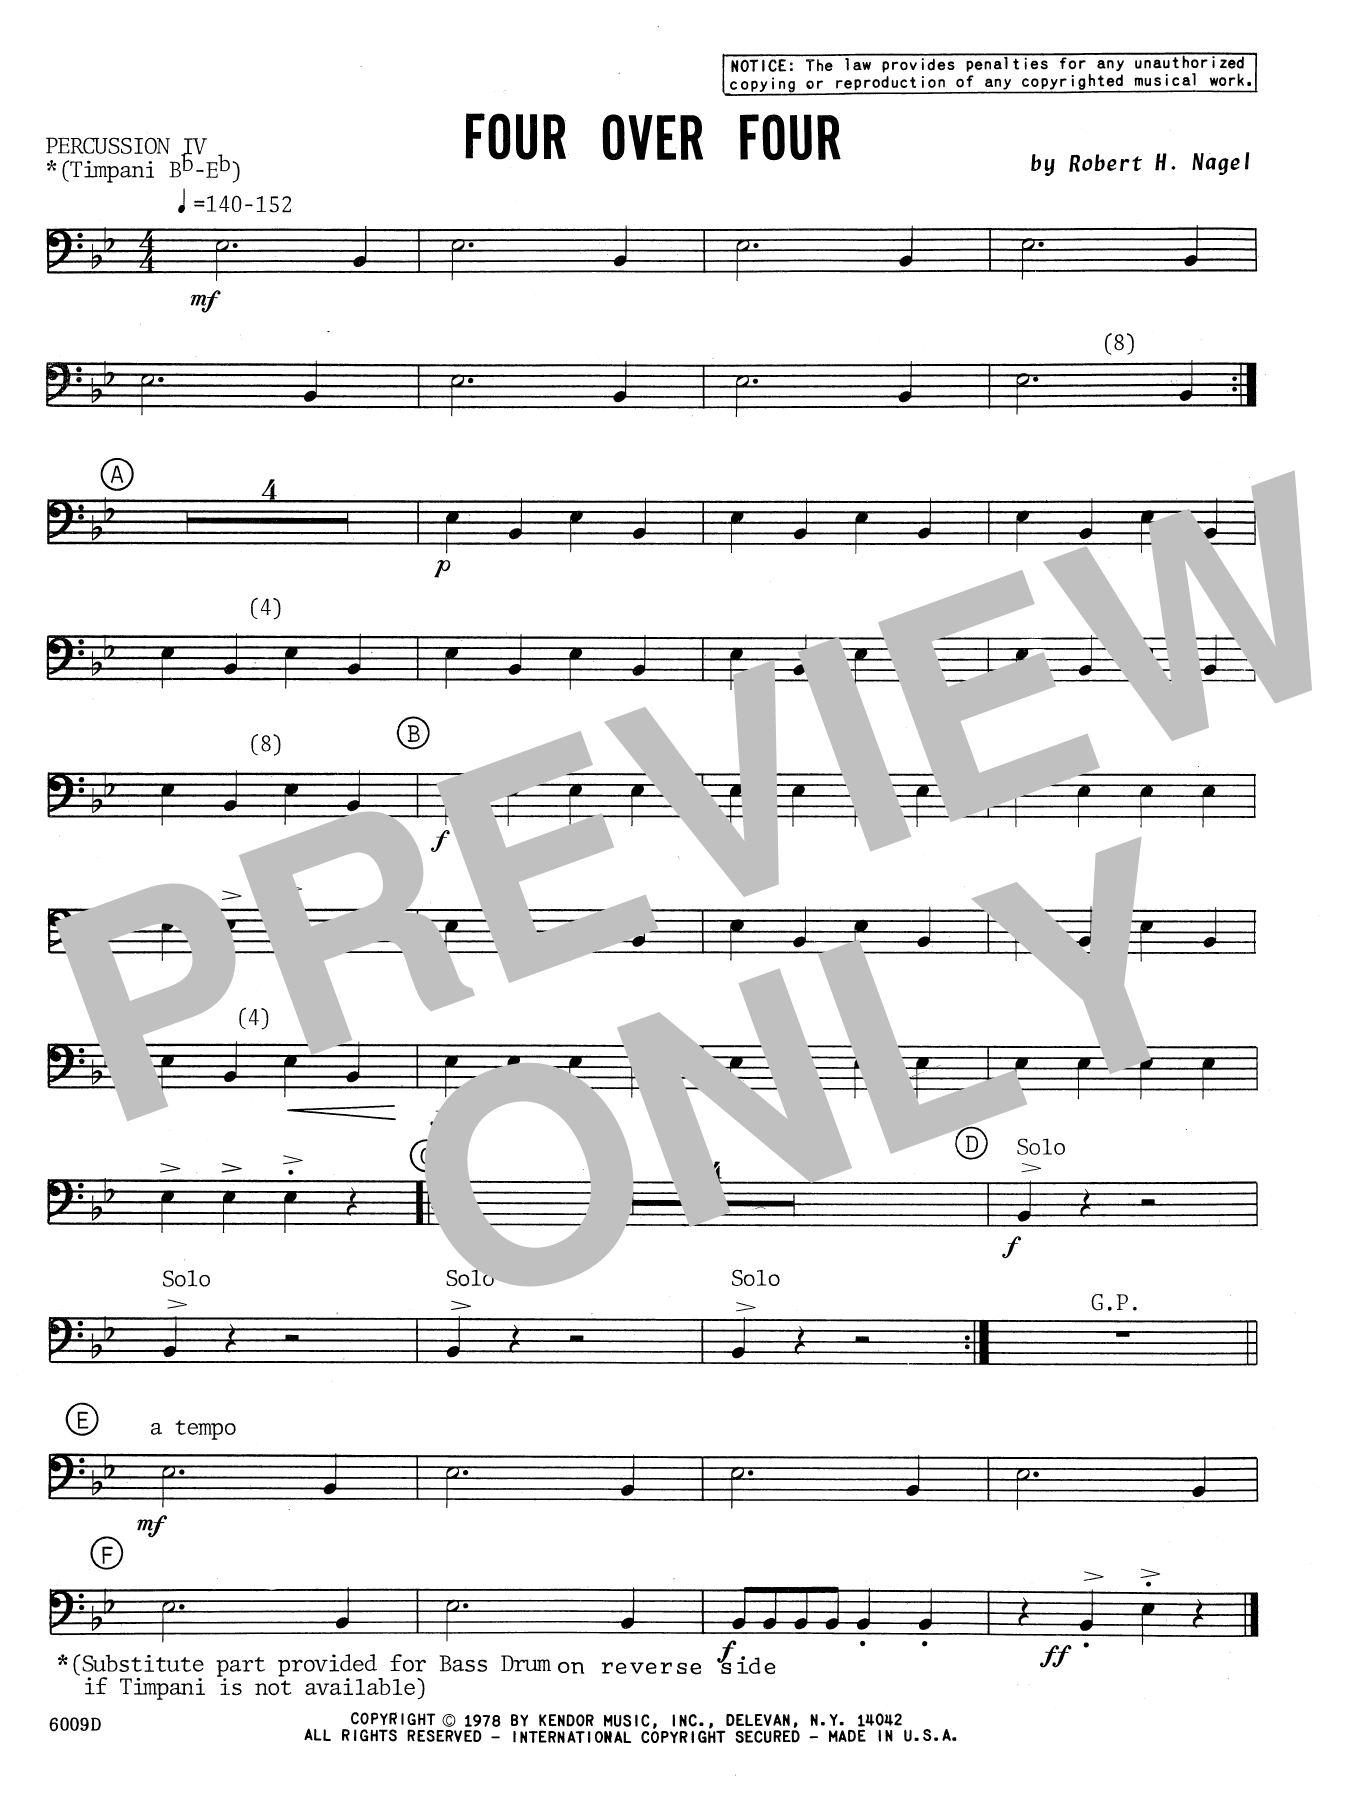 Download Robert H. Nagel Four Over Four - Percussion 4 Sheet Music